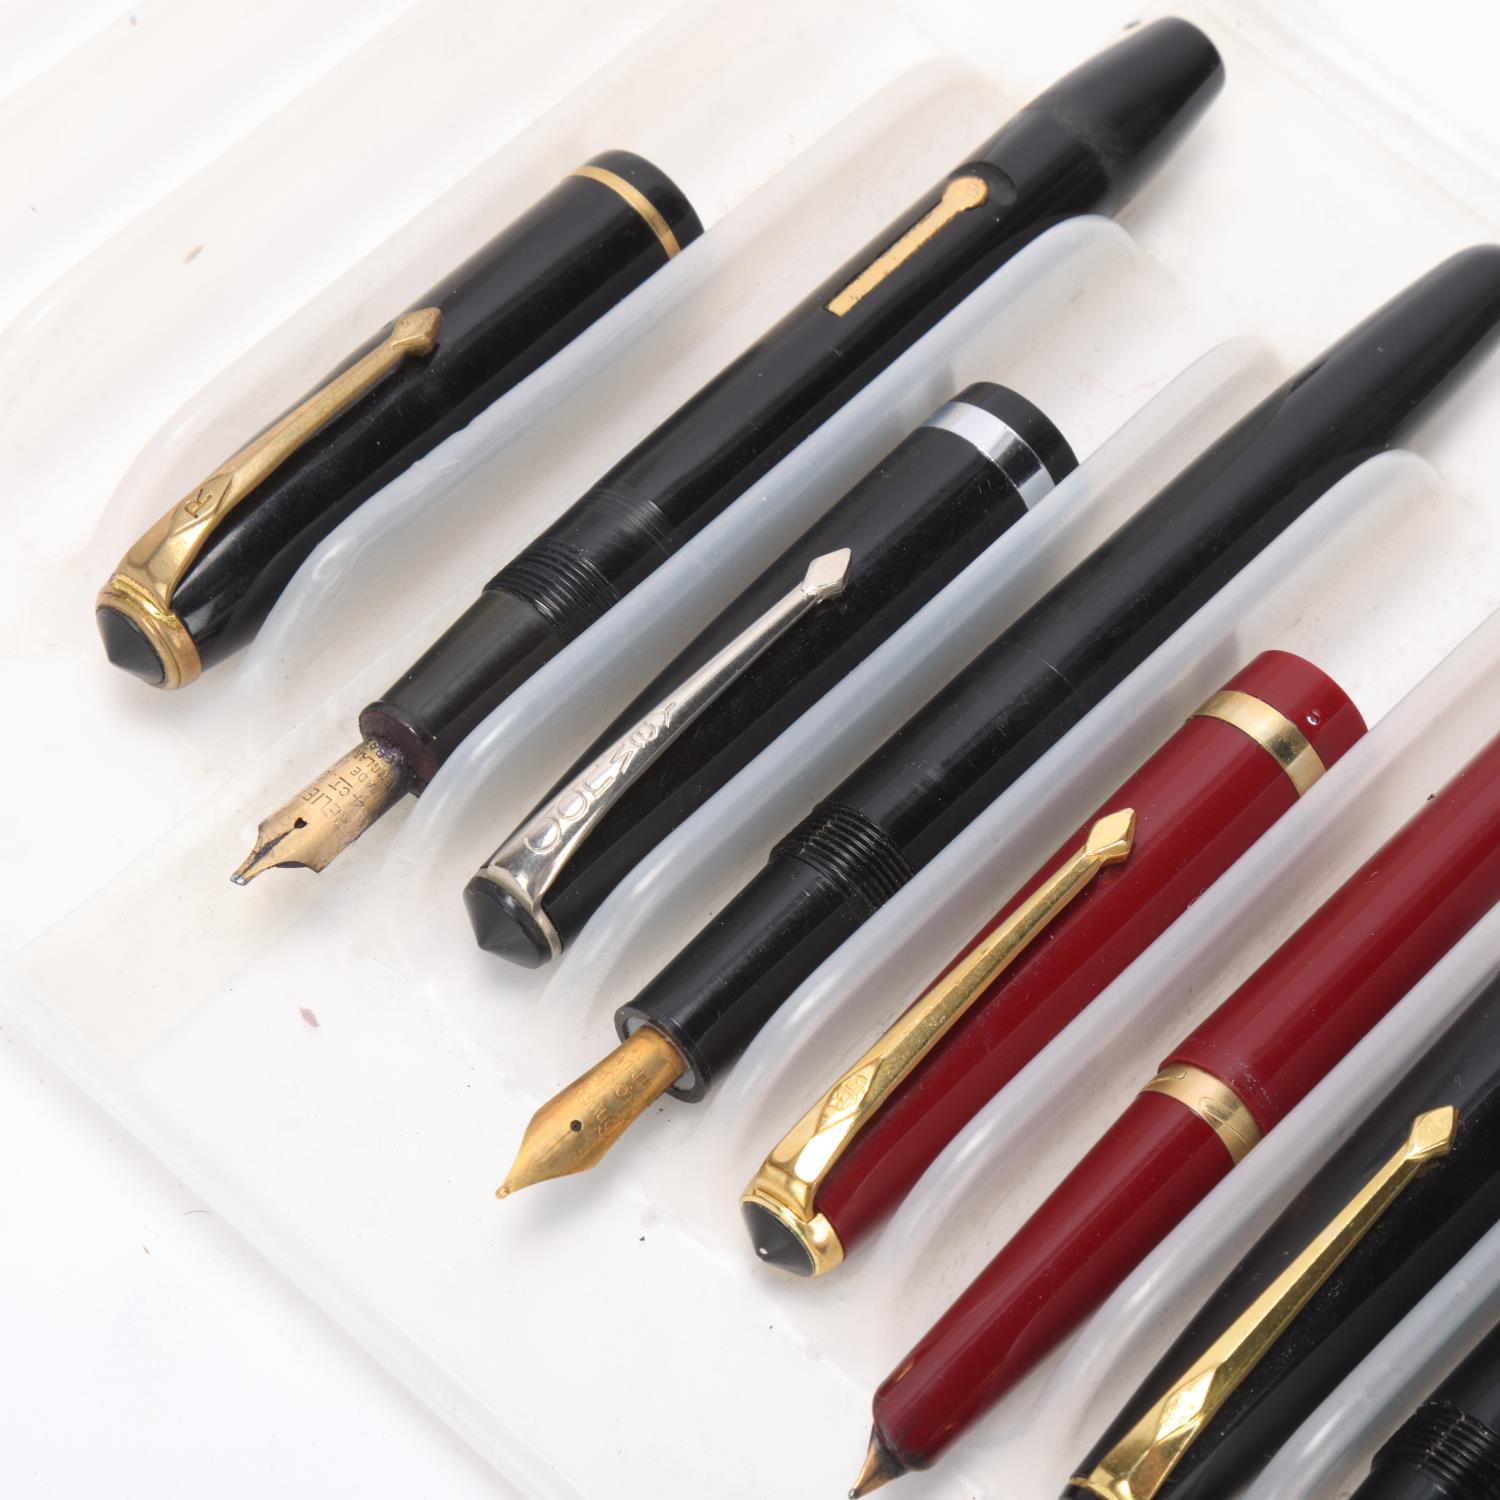 6 vintage Conway Stewart fountain pens, including Model 150, "Relief" No12 lever fill, red 106, - Image 3 of 4